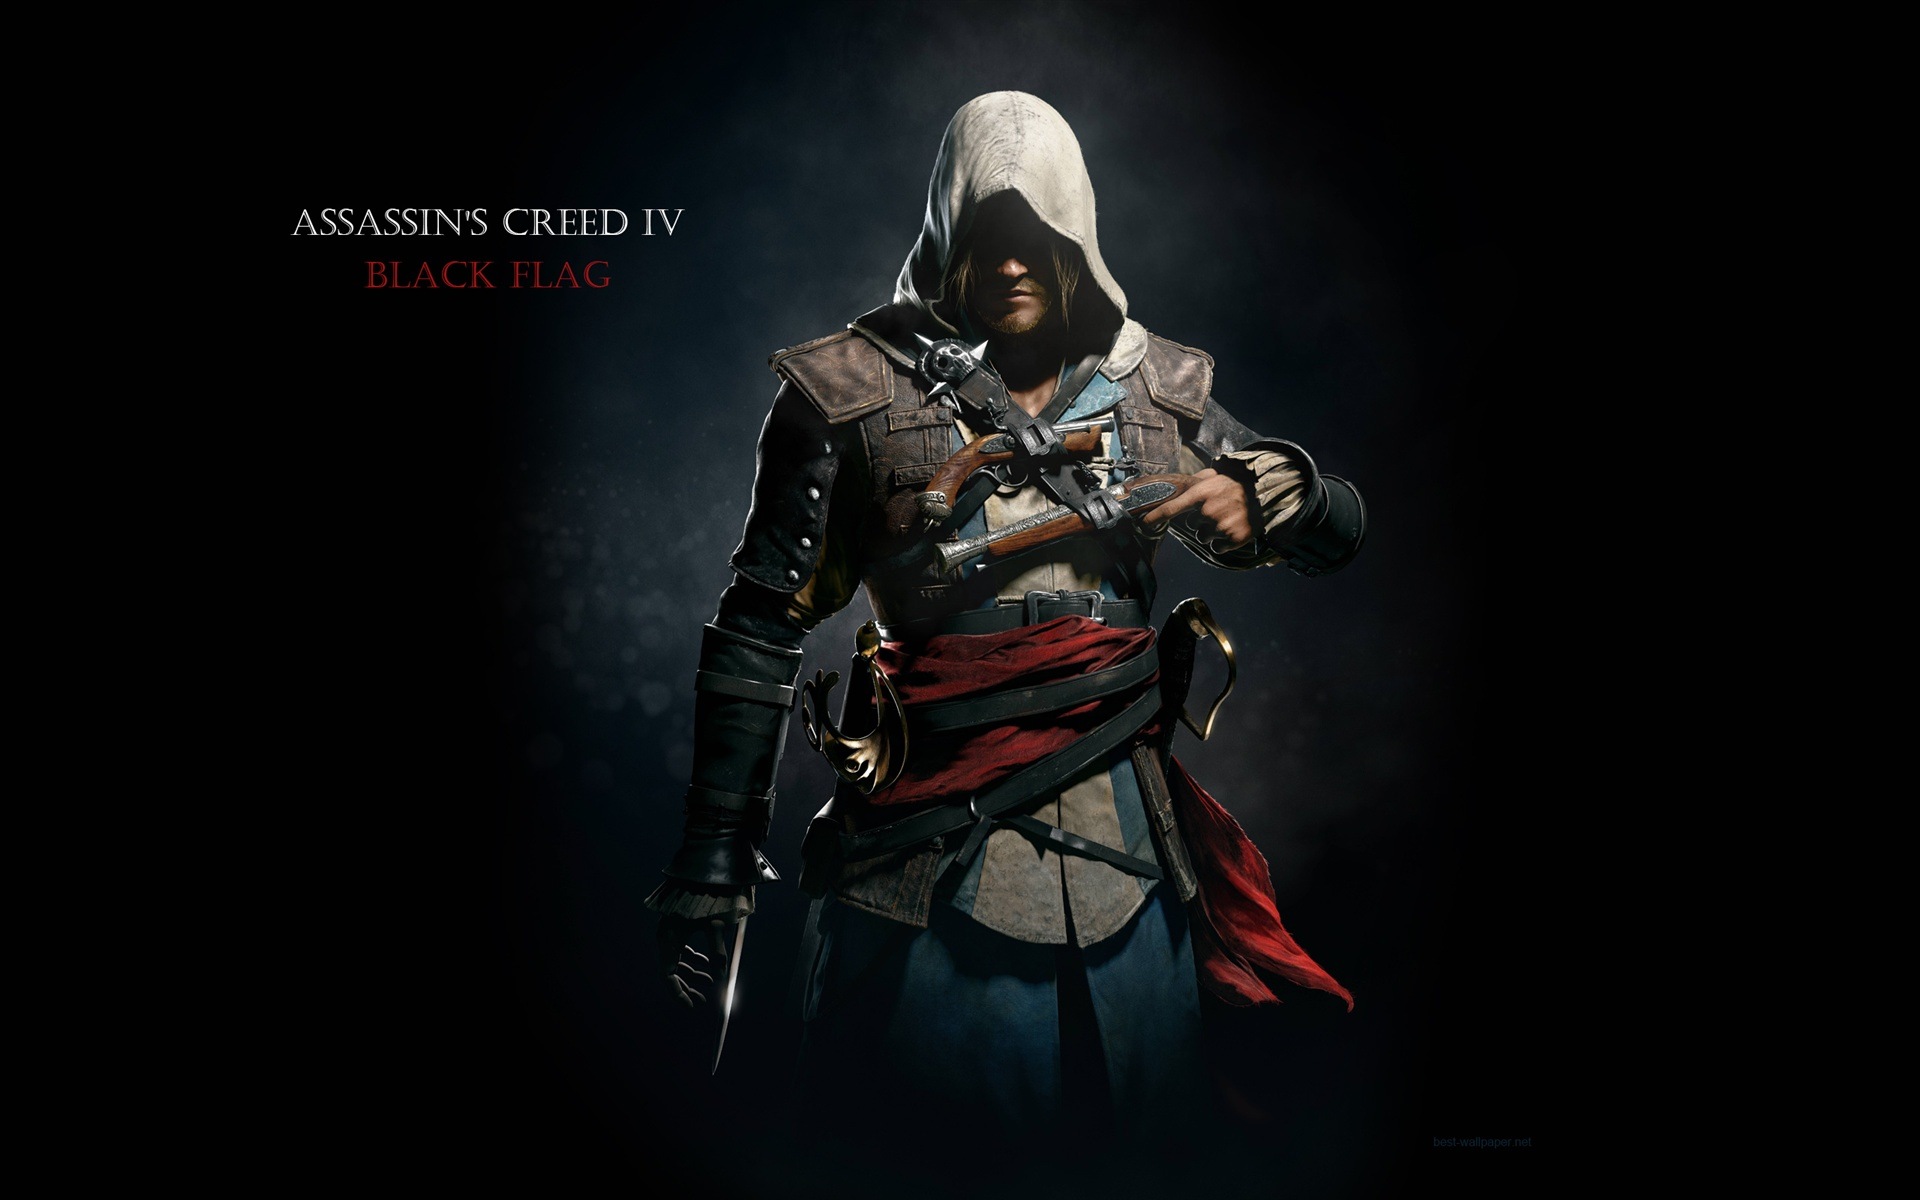 Creed IV Assassin: Black Flag HD wallpapers #9 - 1920x1200